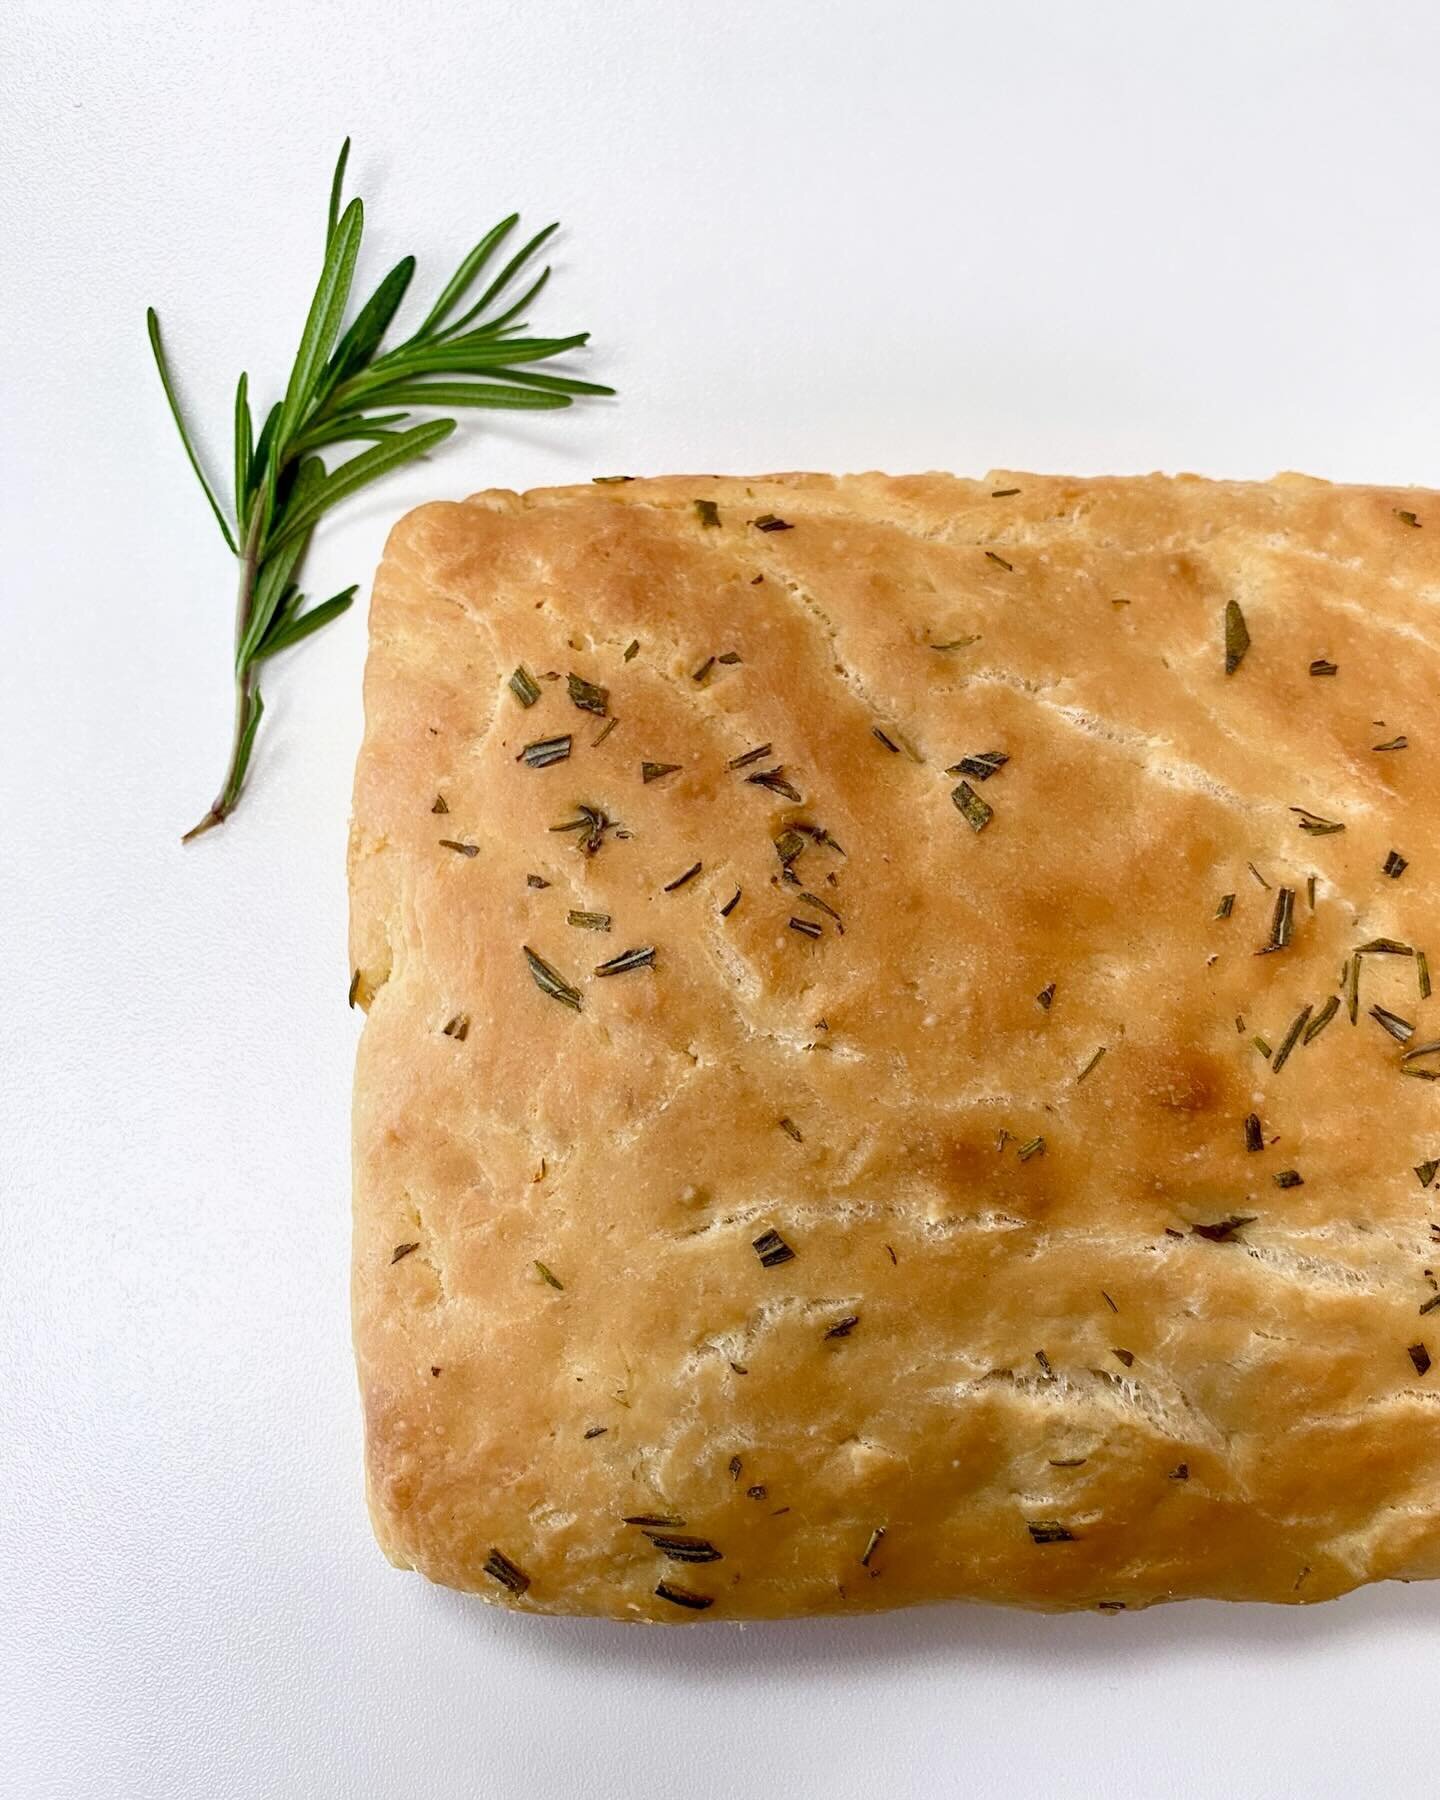 It&rsquo;s focaccia Friday! There&rsquo;s nothing like warm, toasty bread to help cozy up the rainy next few days. Our current favorite pairings are with: 

✅ spaghetti + meatballs 🍝
✅ egg sandwiches 🍳
✅ butter 🧈
✅ all by itself ✨

 Stop by the sh